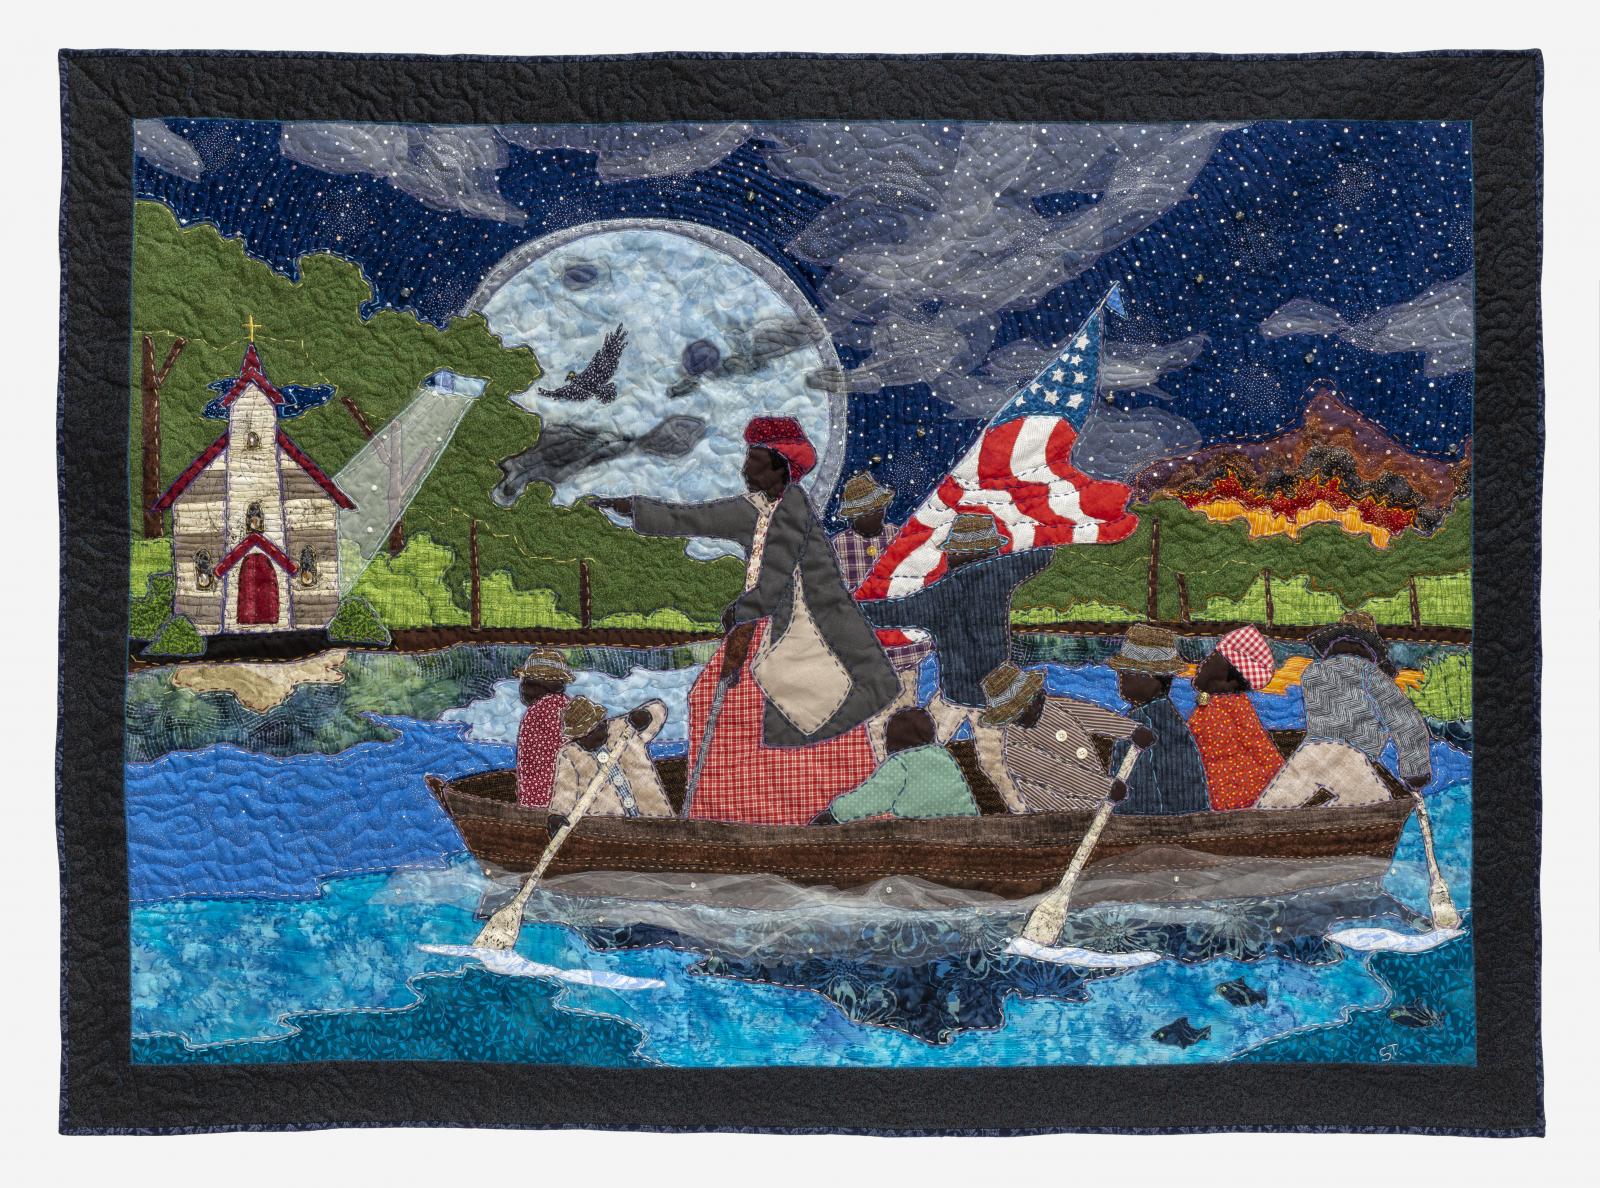 Fiber art piece of people rowing on a boat at night by Stephen Towns